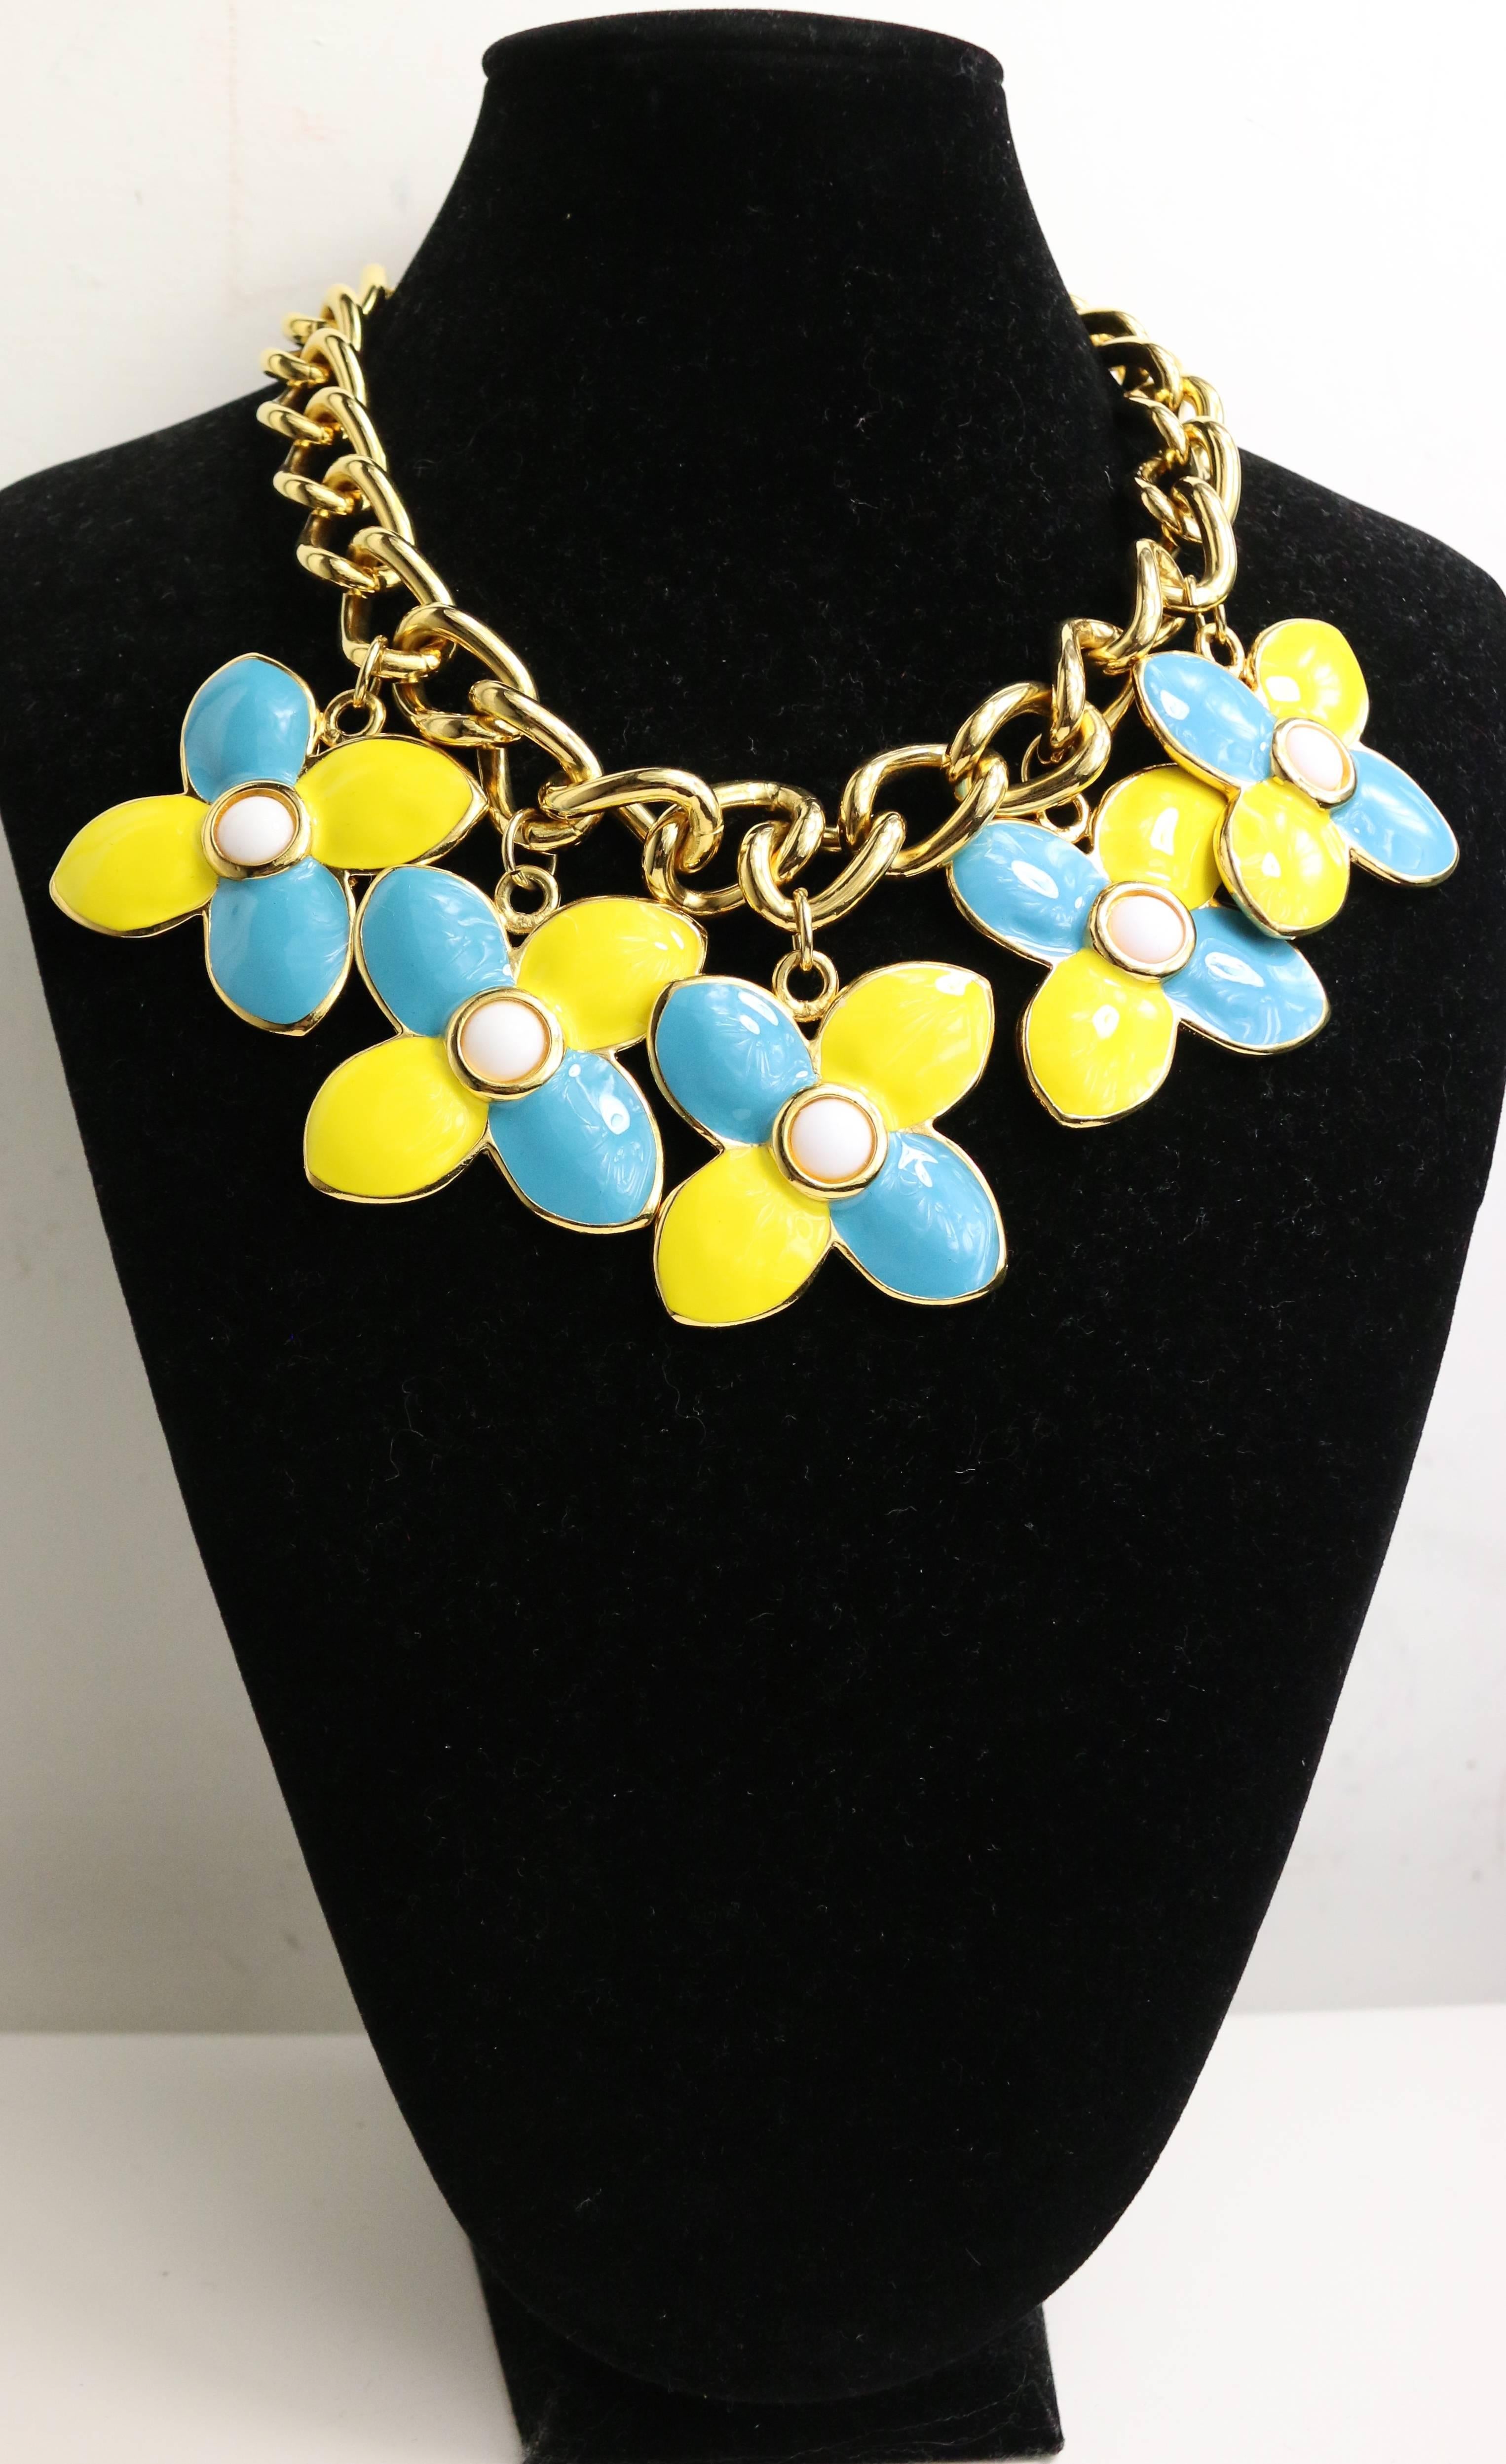 - Vintage 80s Escada yellow and light blue clovers gemstones with a white round gemstone in the center. Featuring a gold toned chain with a hook closure. Such a bright color and cute necklace. Wear it with joy!

- Made in Germany. 

- Total length: